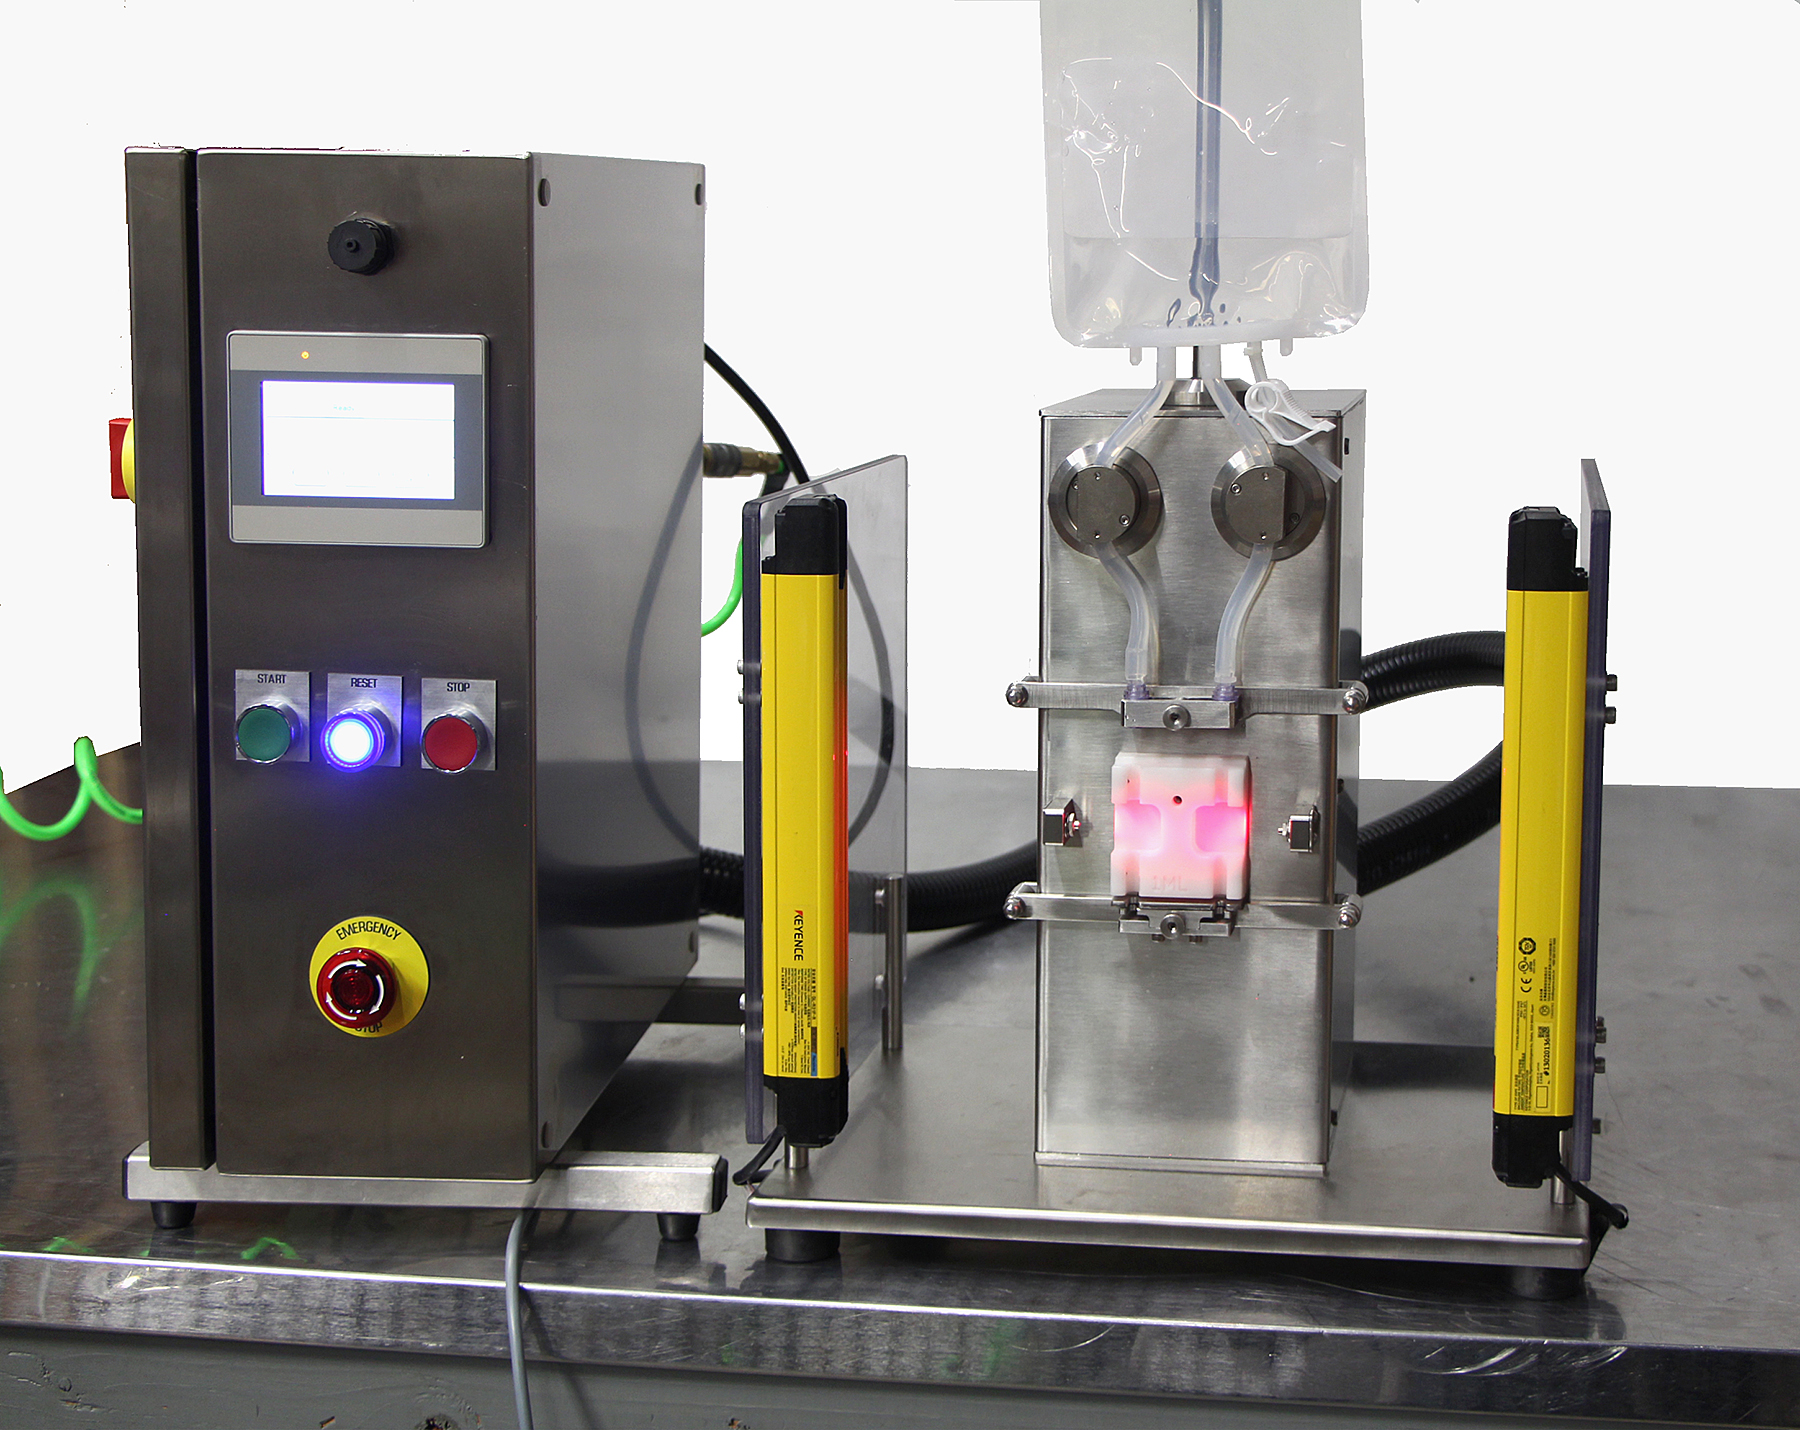 At INTERPHEX NYC, TurboFil to Showcase Module for Simplified, Automated Syringe Filling & Assembly 